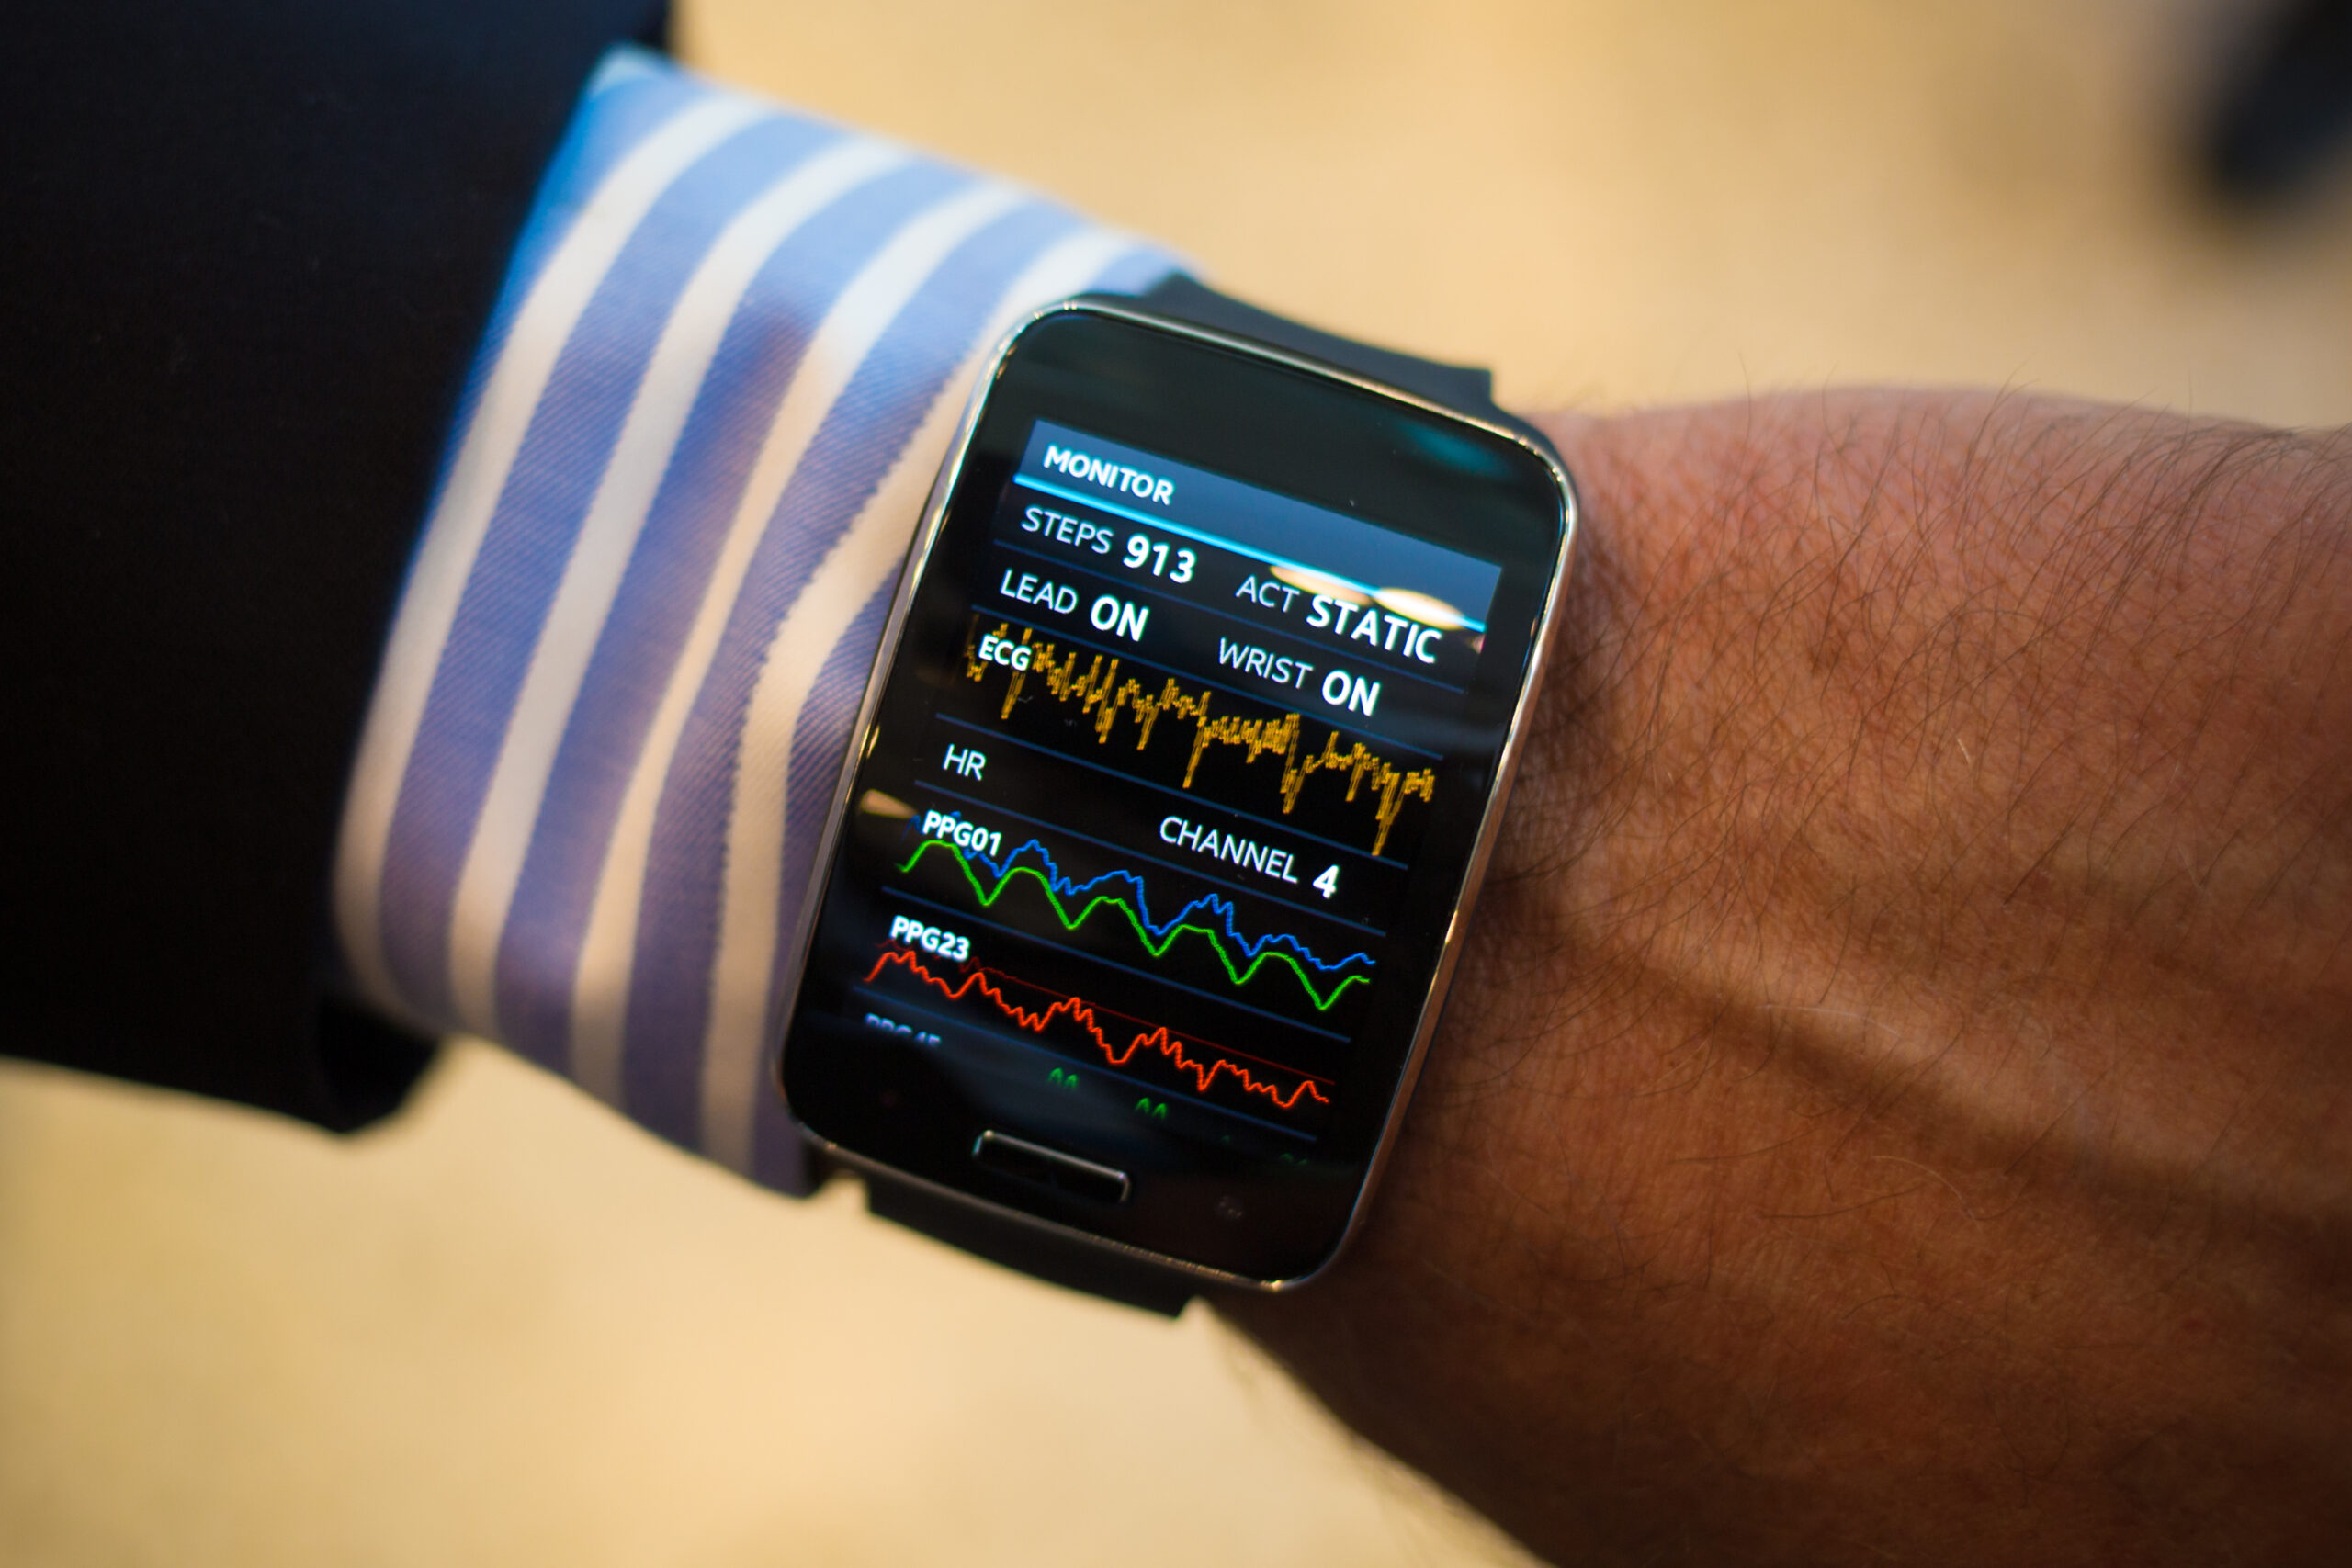 Samsung moves from fitness tracking to health monitoring